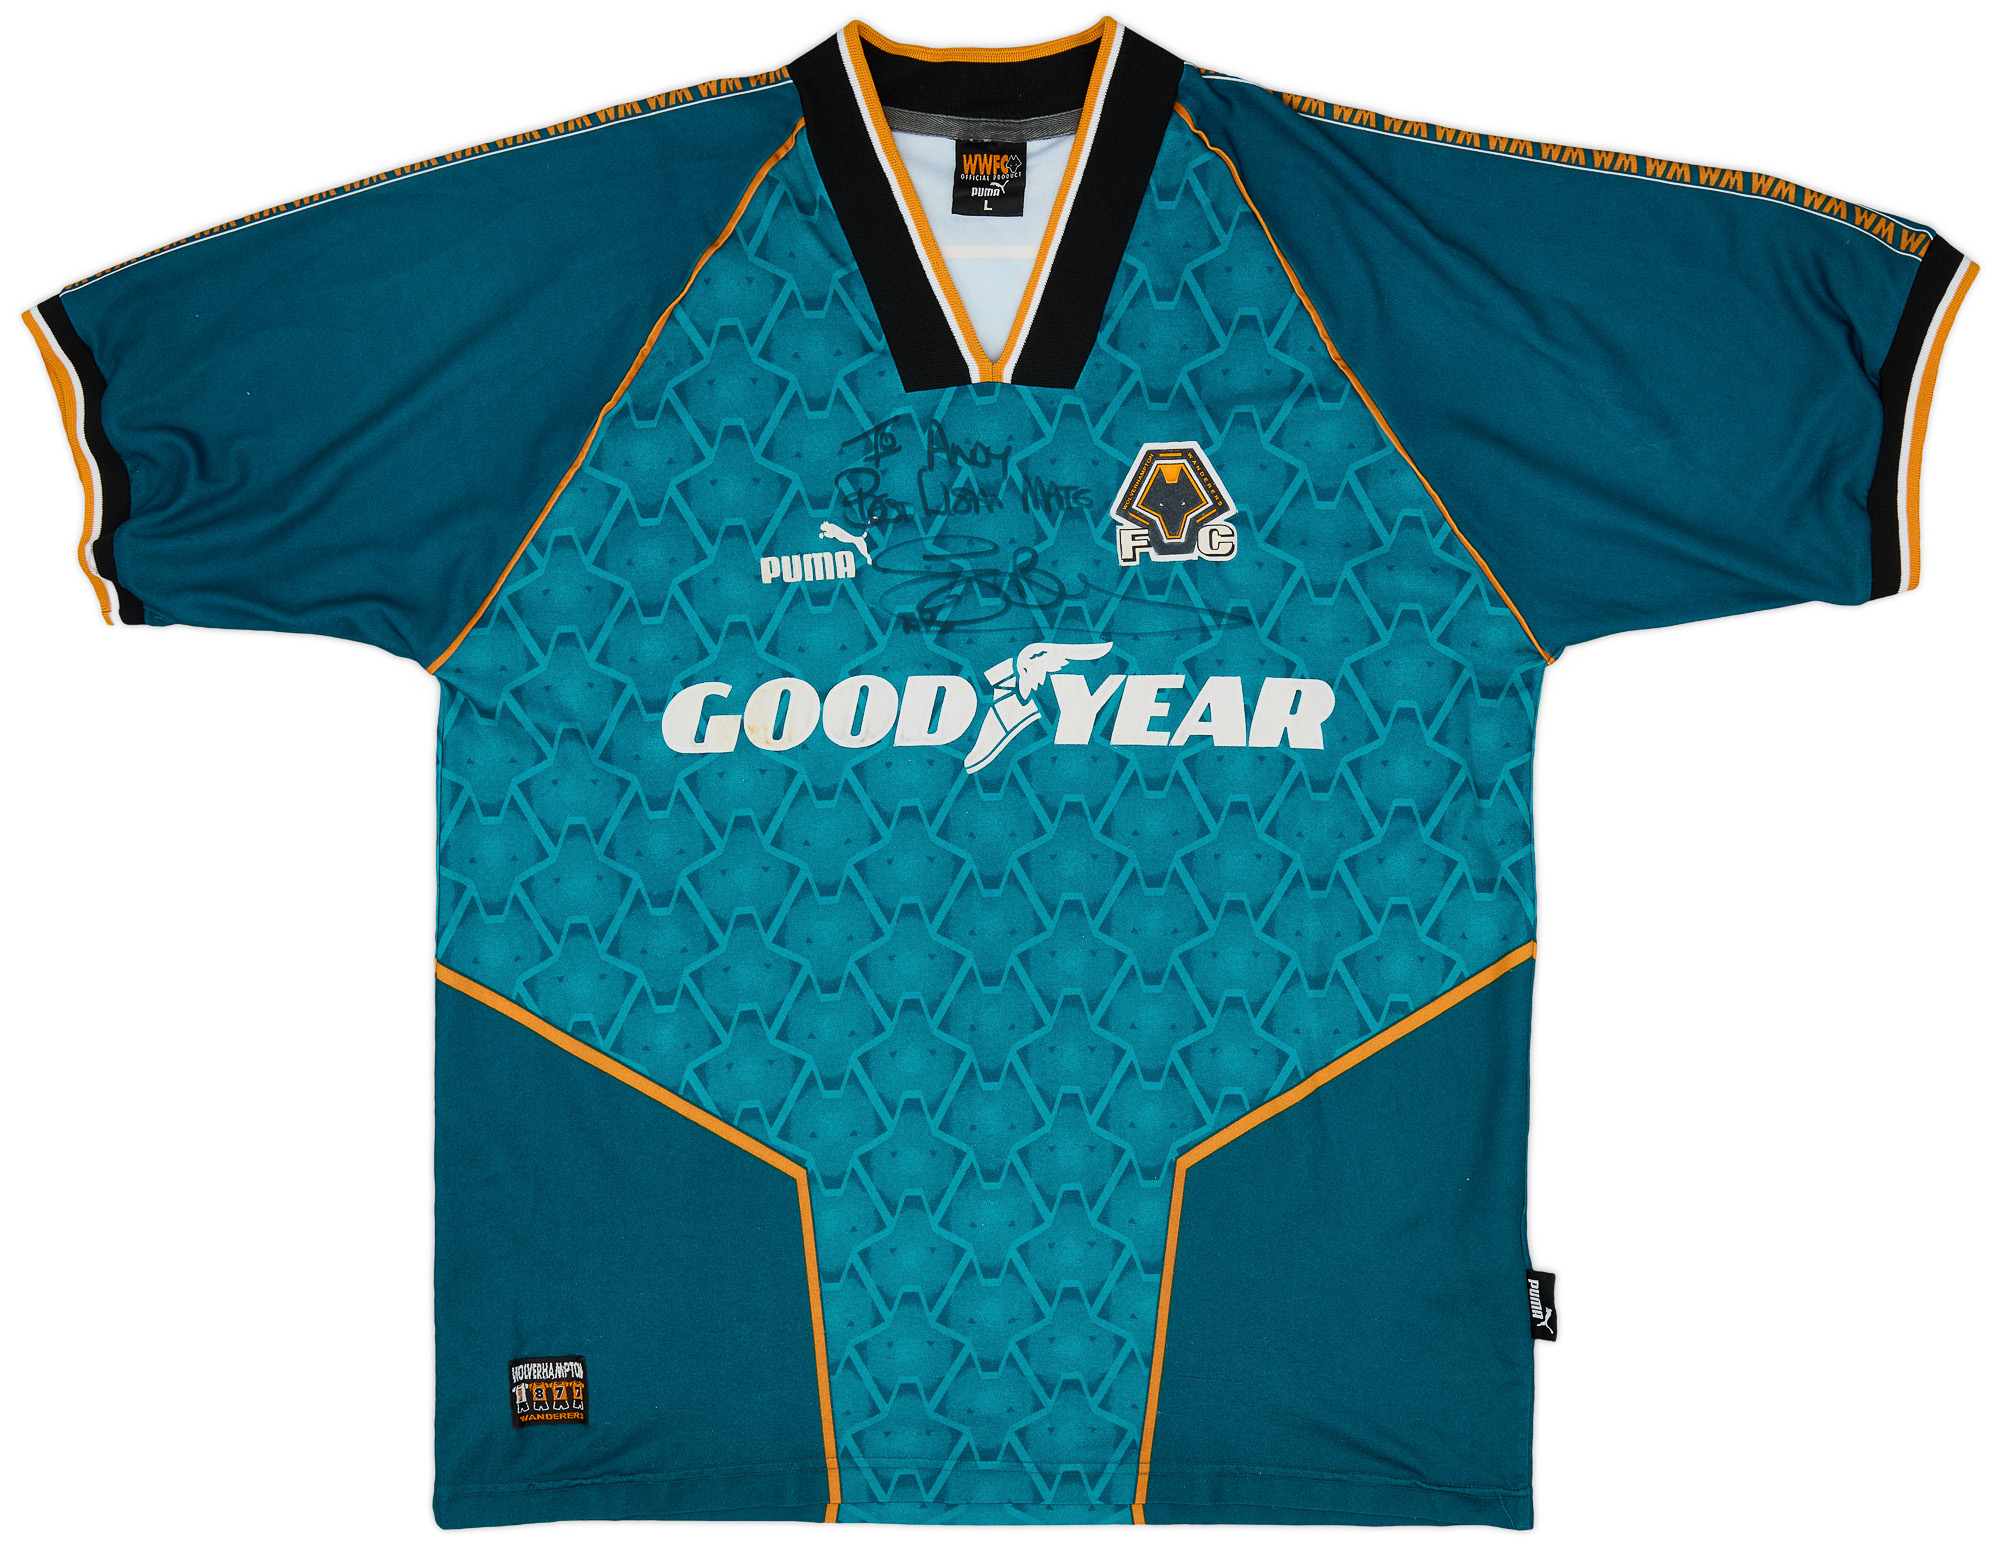 1996-97 Wolves Signed Away Shirt - 8/10 - ()